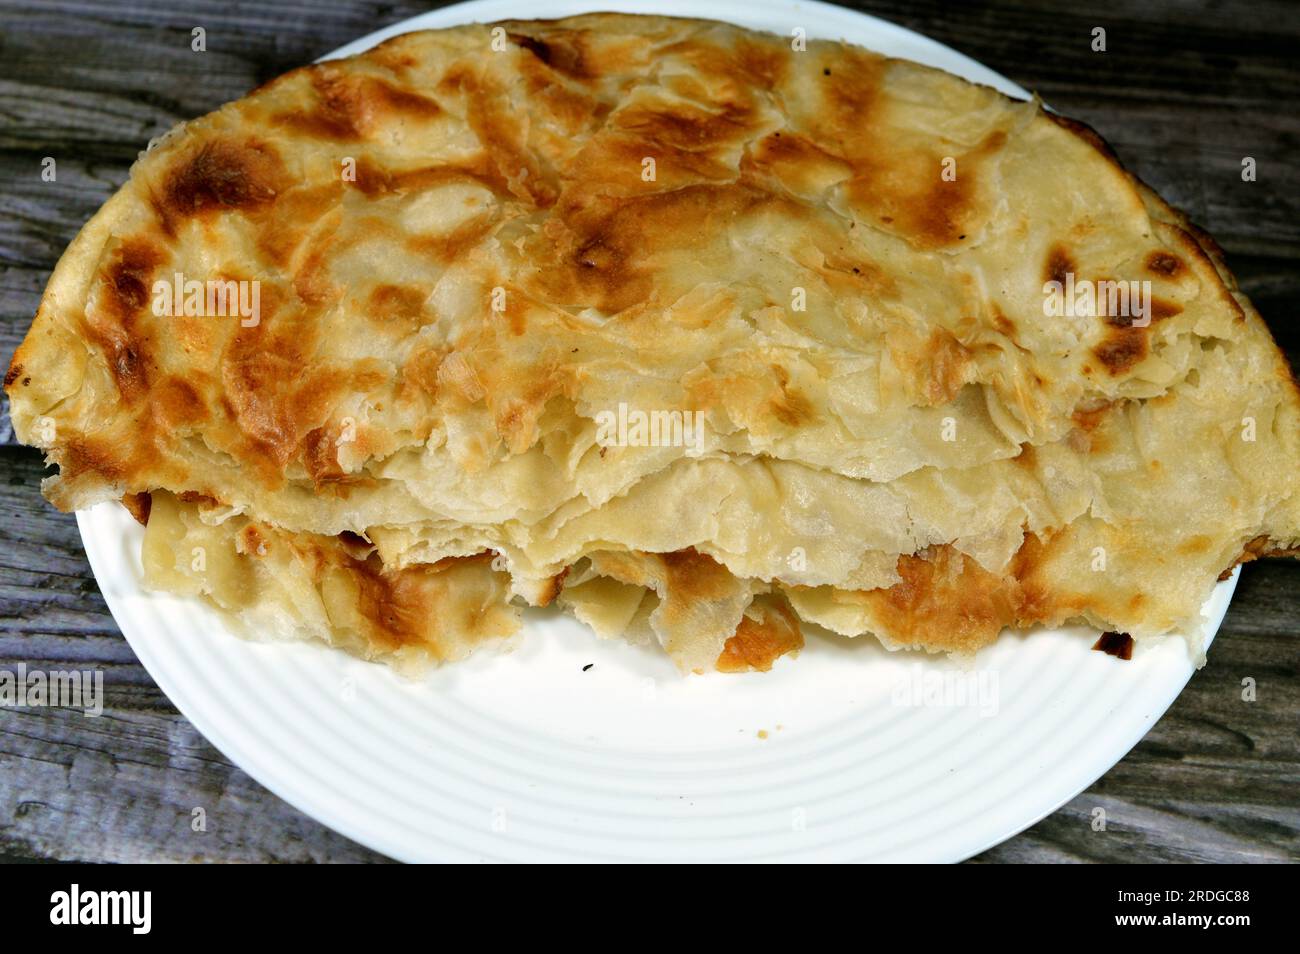 Egyptian Feteer meshaltet, layers upon layers of pastry dough with loads of ghee or butter in between, one of the famous Egyptian pastry recipes, a fl Stock Photo